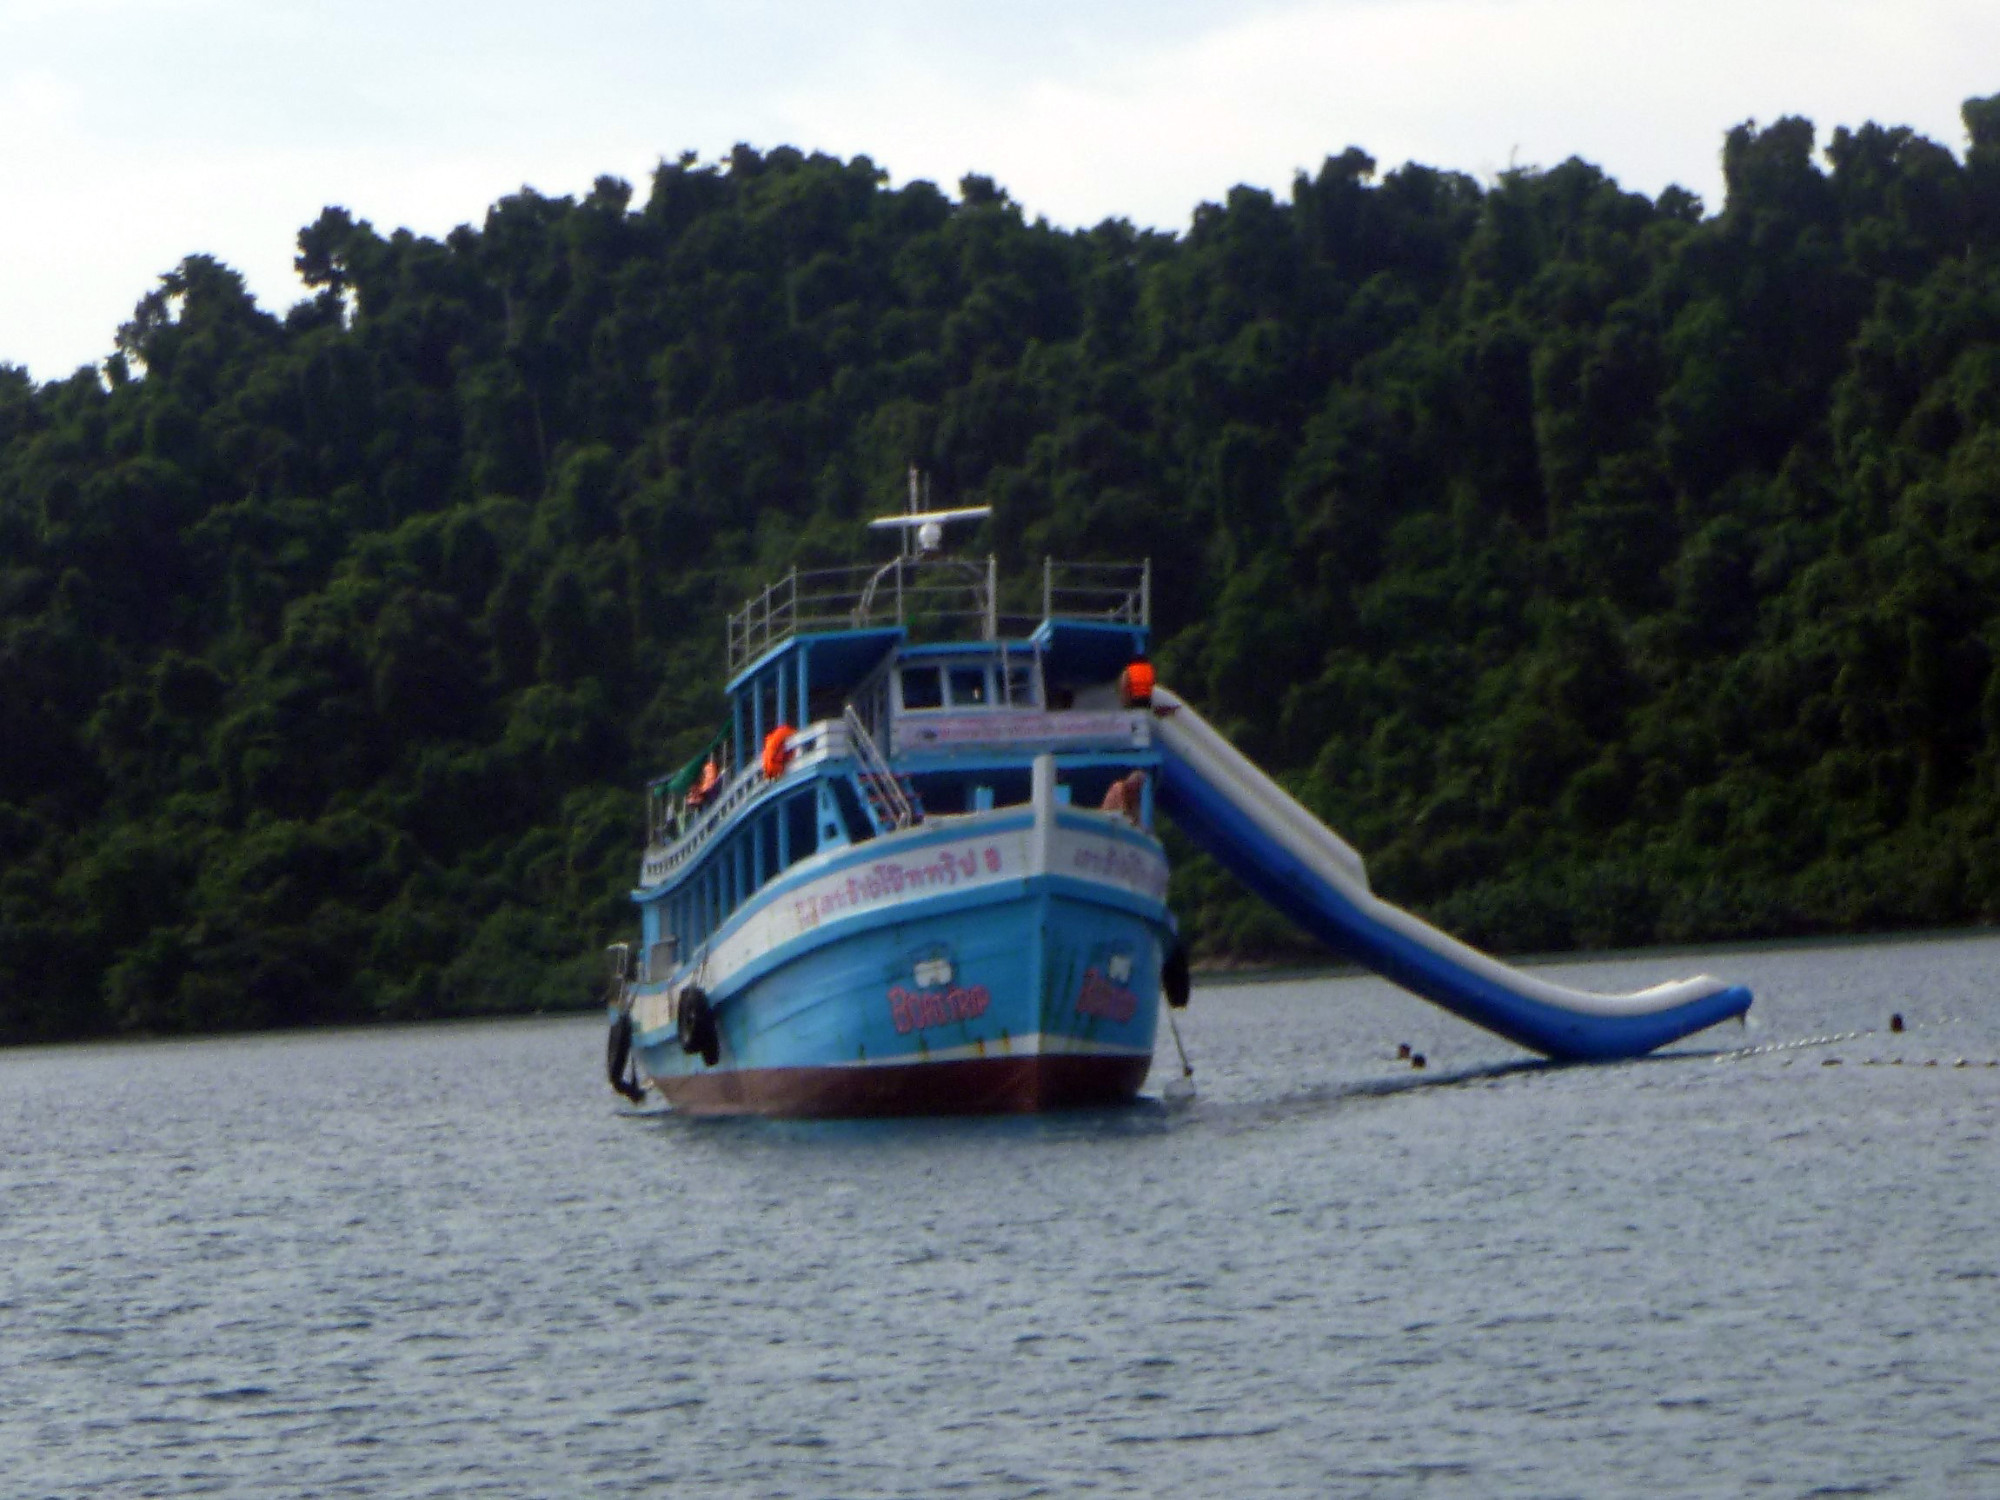 Ship with slide for snorklers